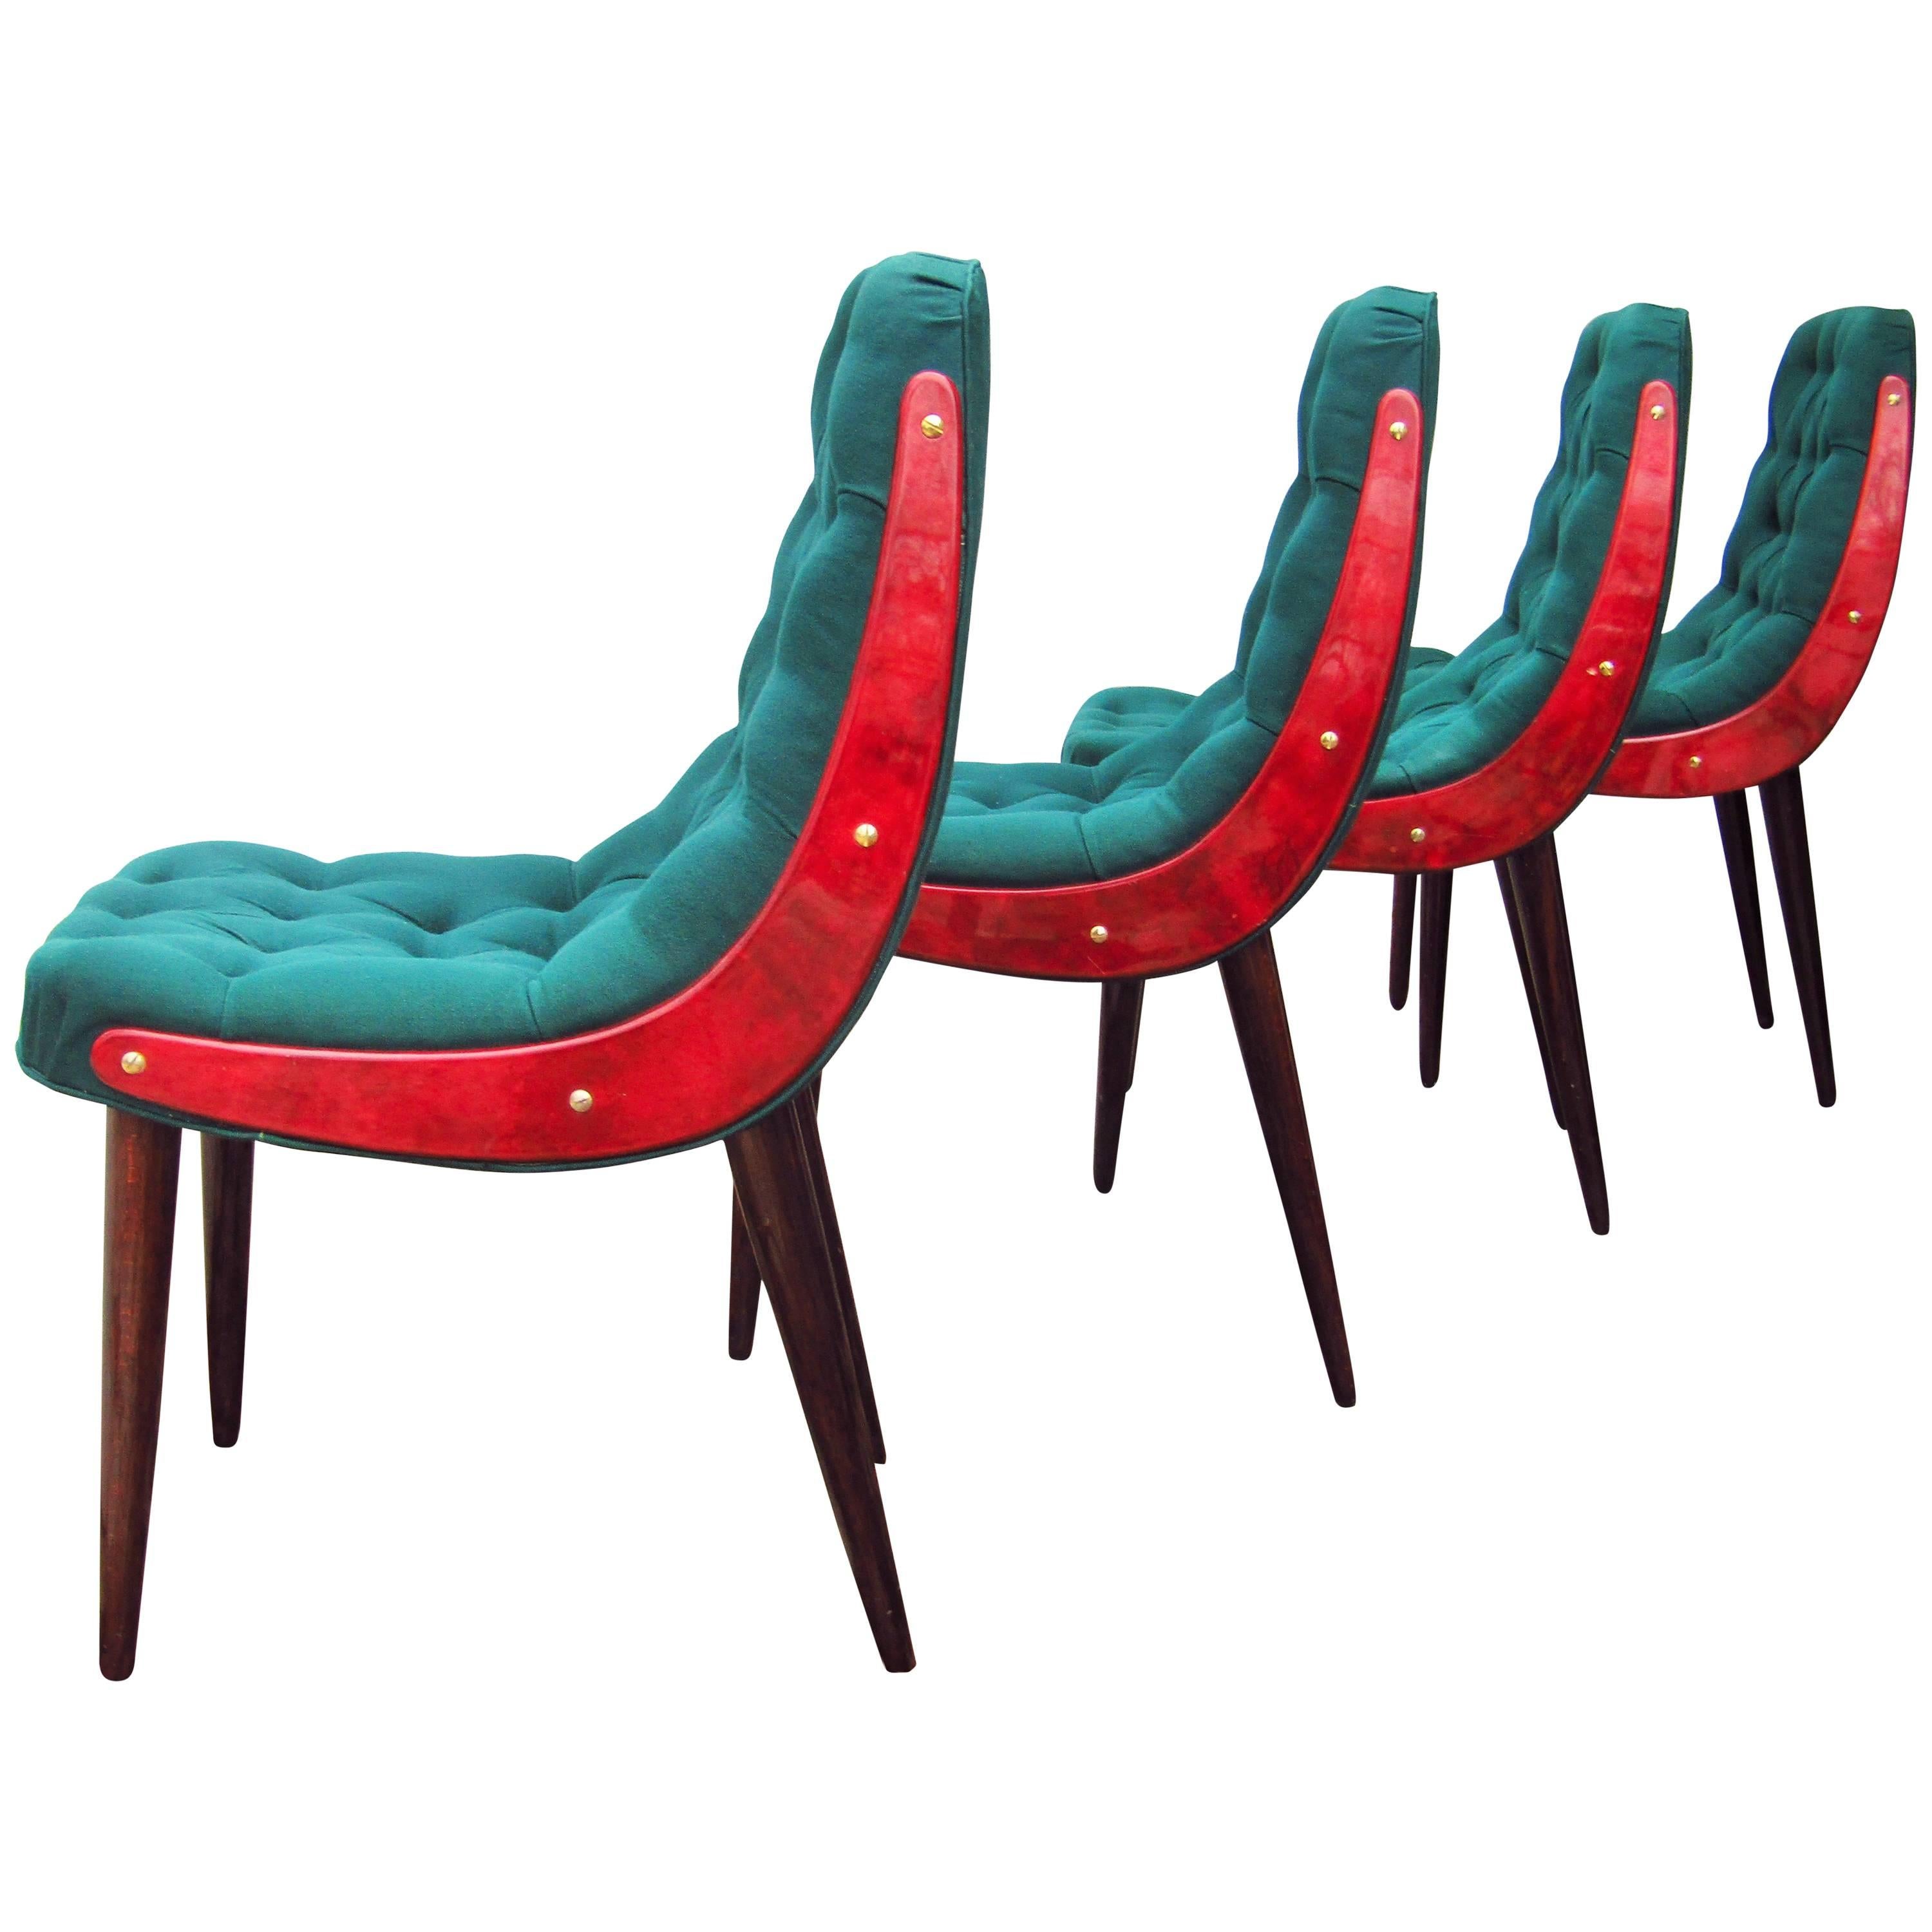 Set of Four Midcentury Dining Chairs by Aldo Tura, Italy, 1960